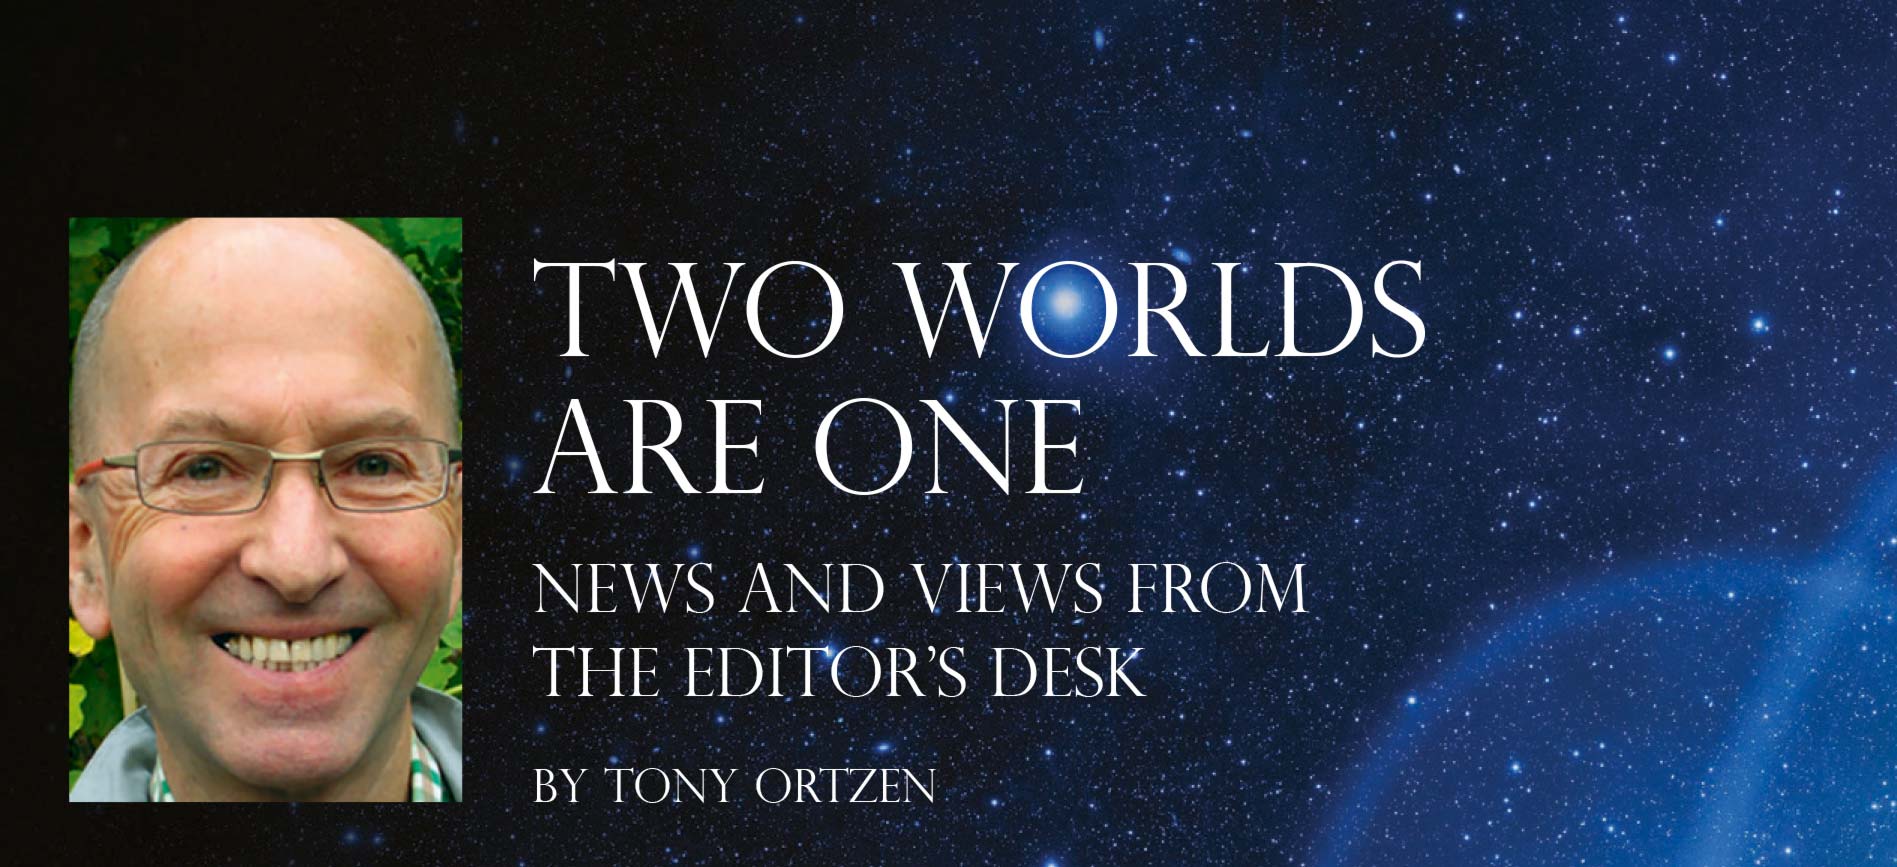 Two Words Are One News and views from the editor’s desk  By Tony Ortzen